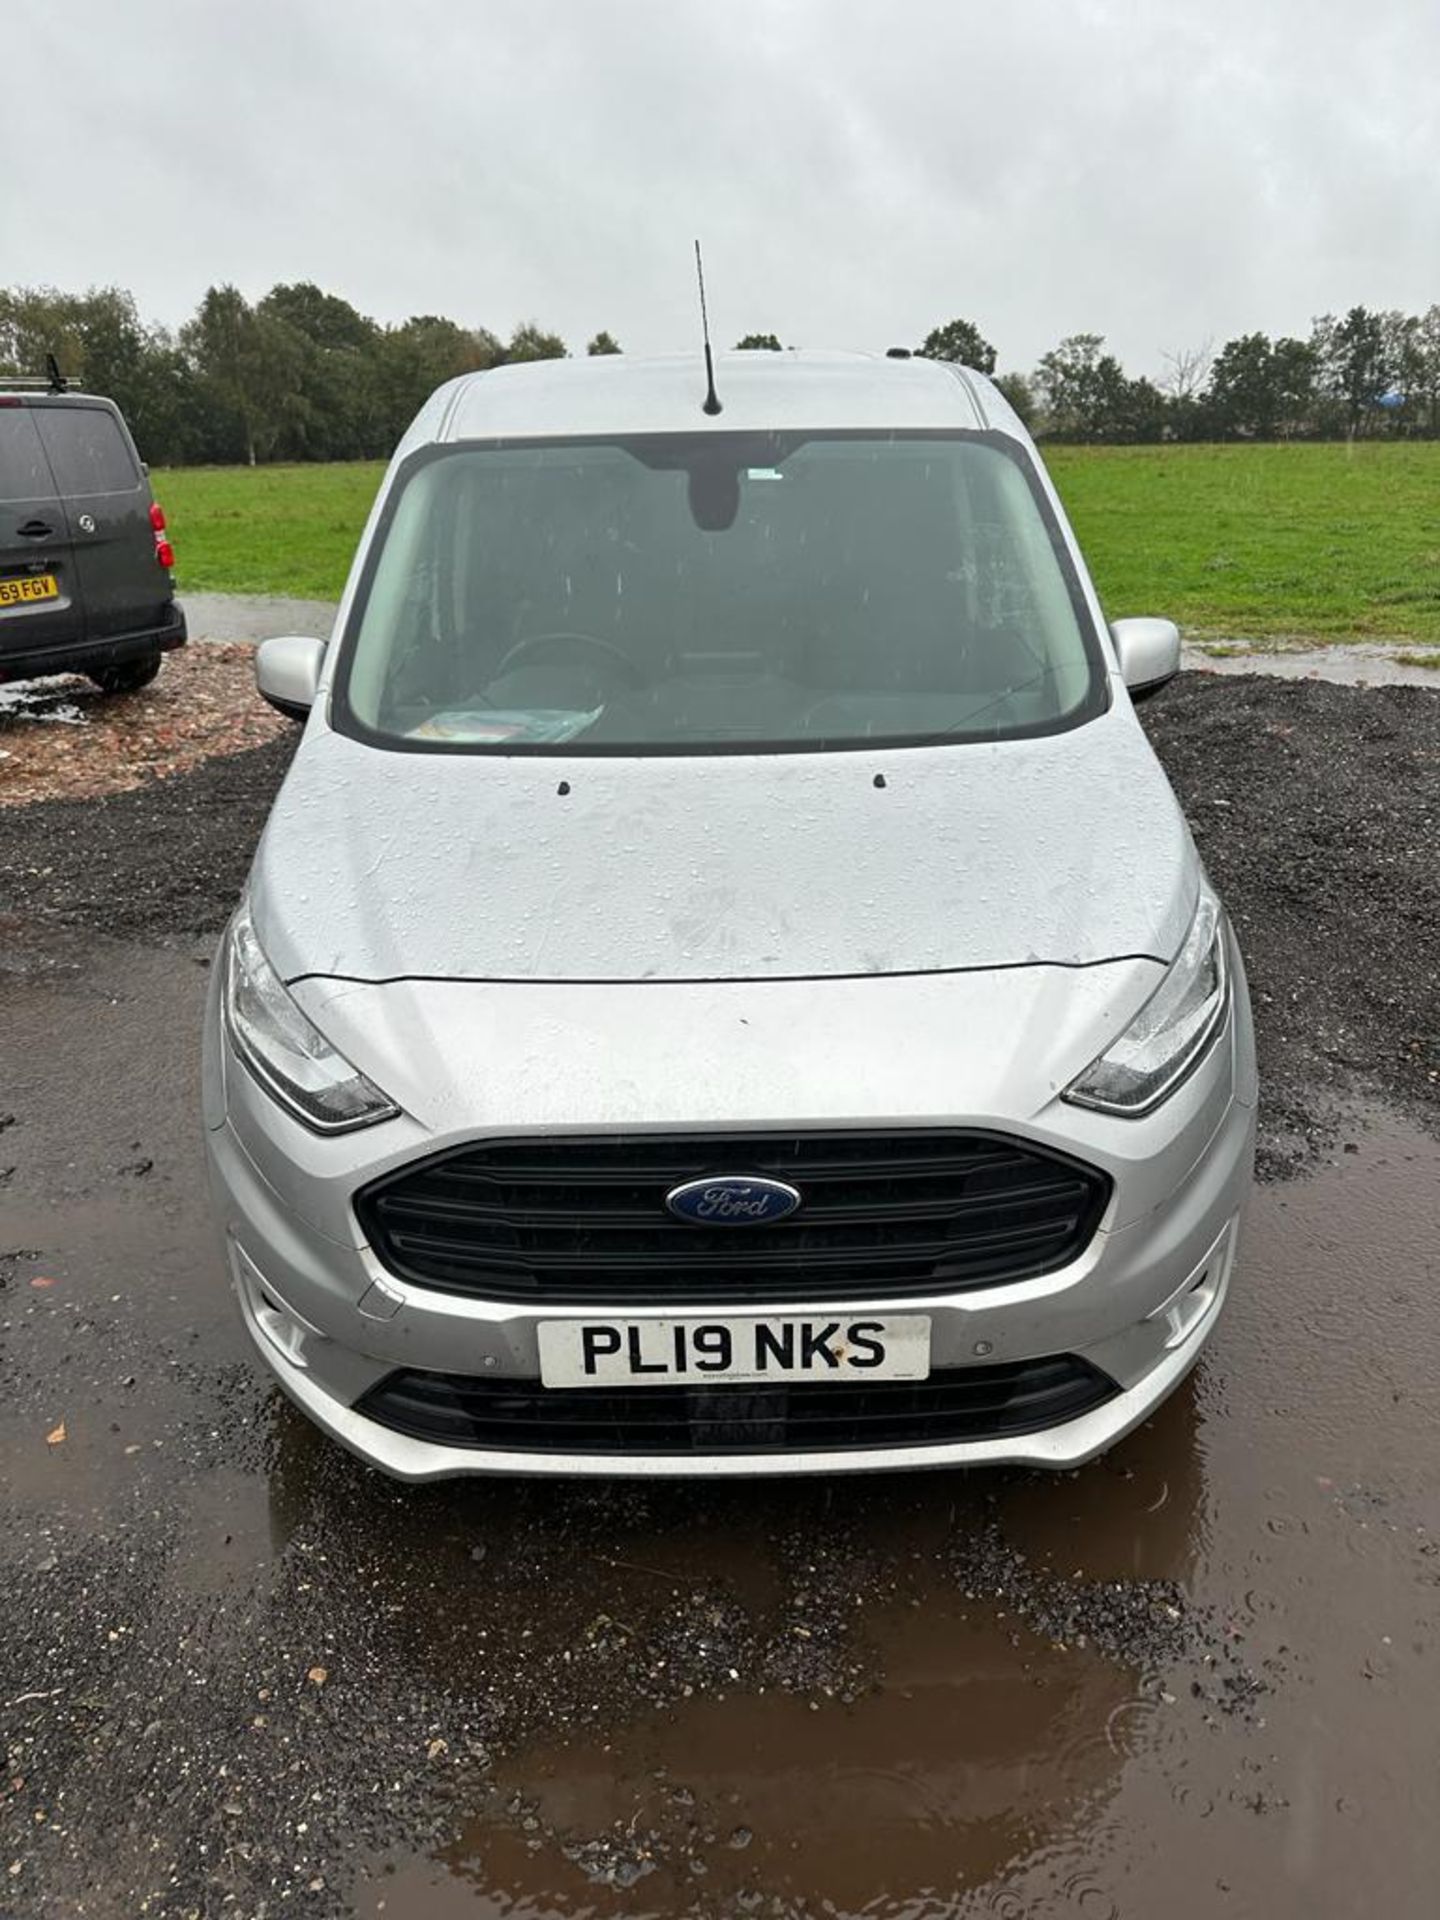 2019 19 FORD TRANSIT CONNECT LIMITED AUTOMATIC PANEL VAN - 123K MILES - ALLOY WHEELS - AIR CON  - Image 10 of 10